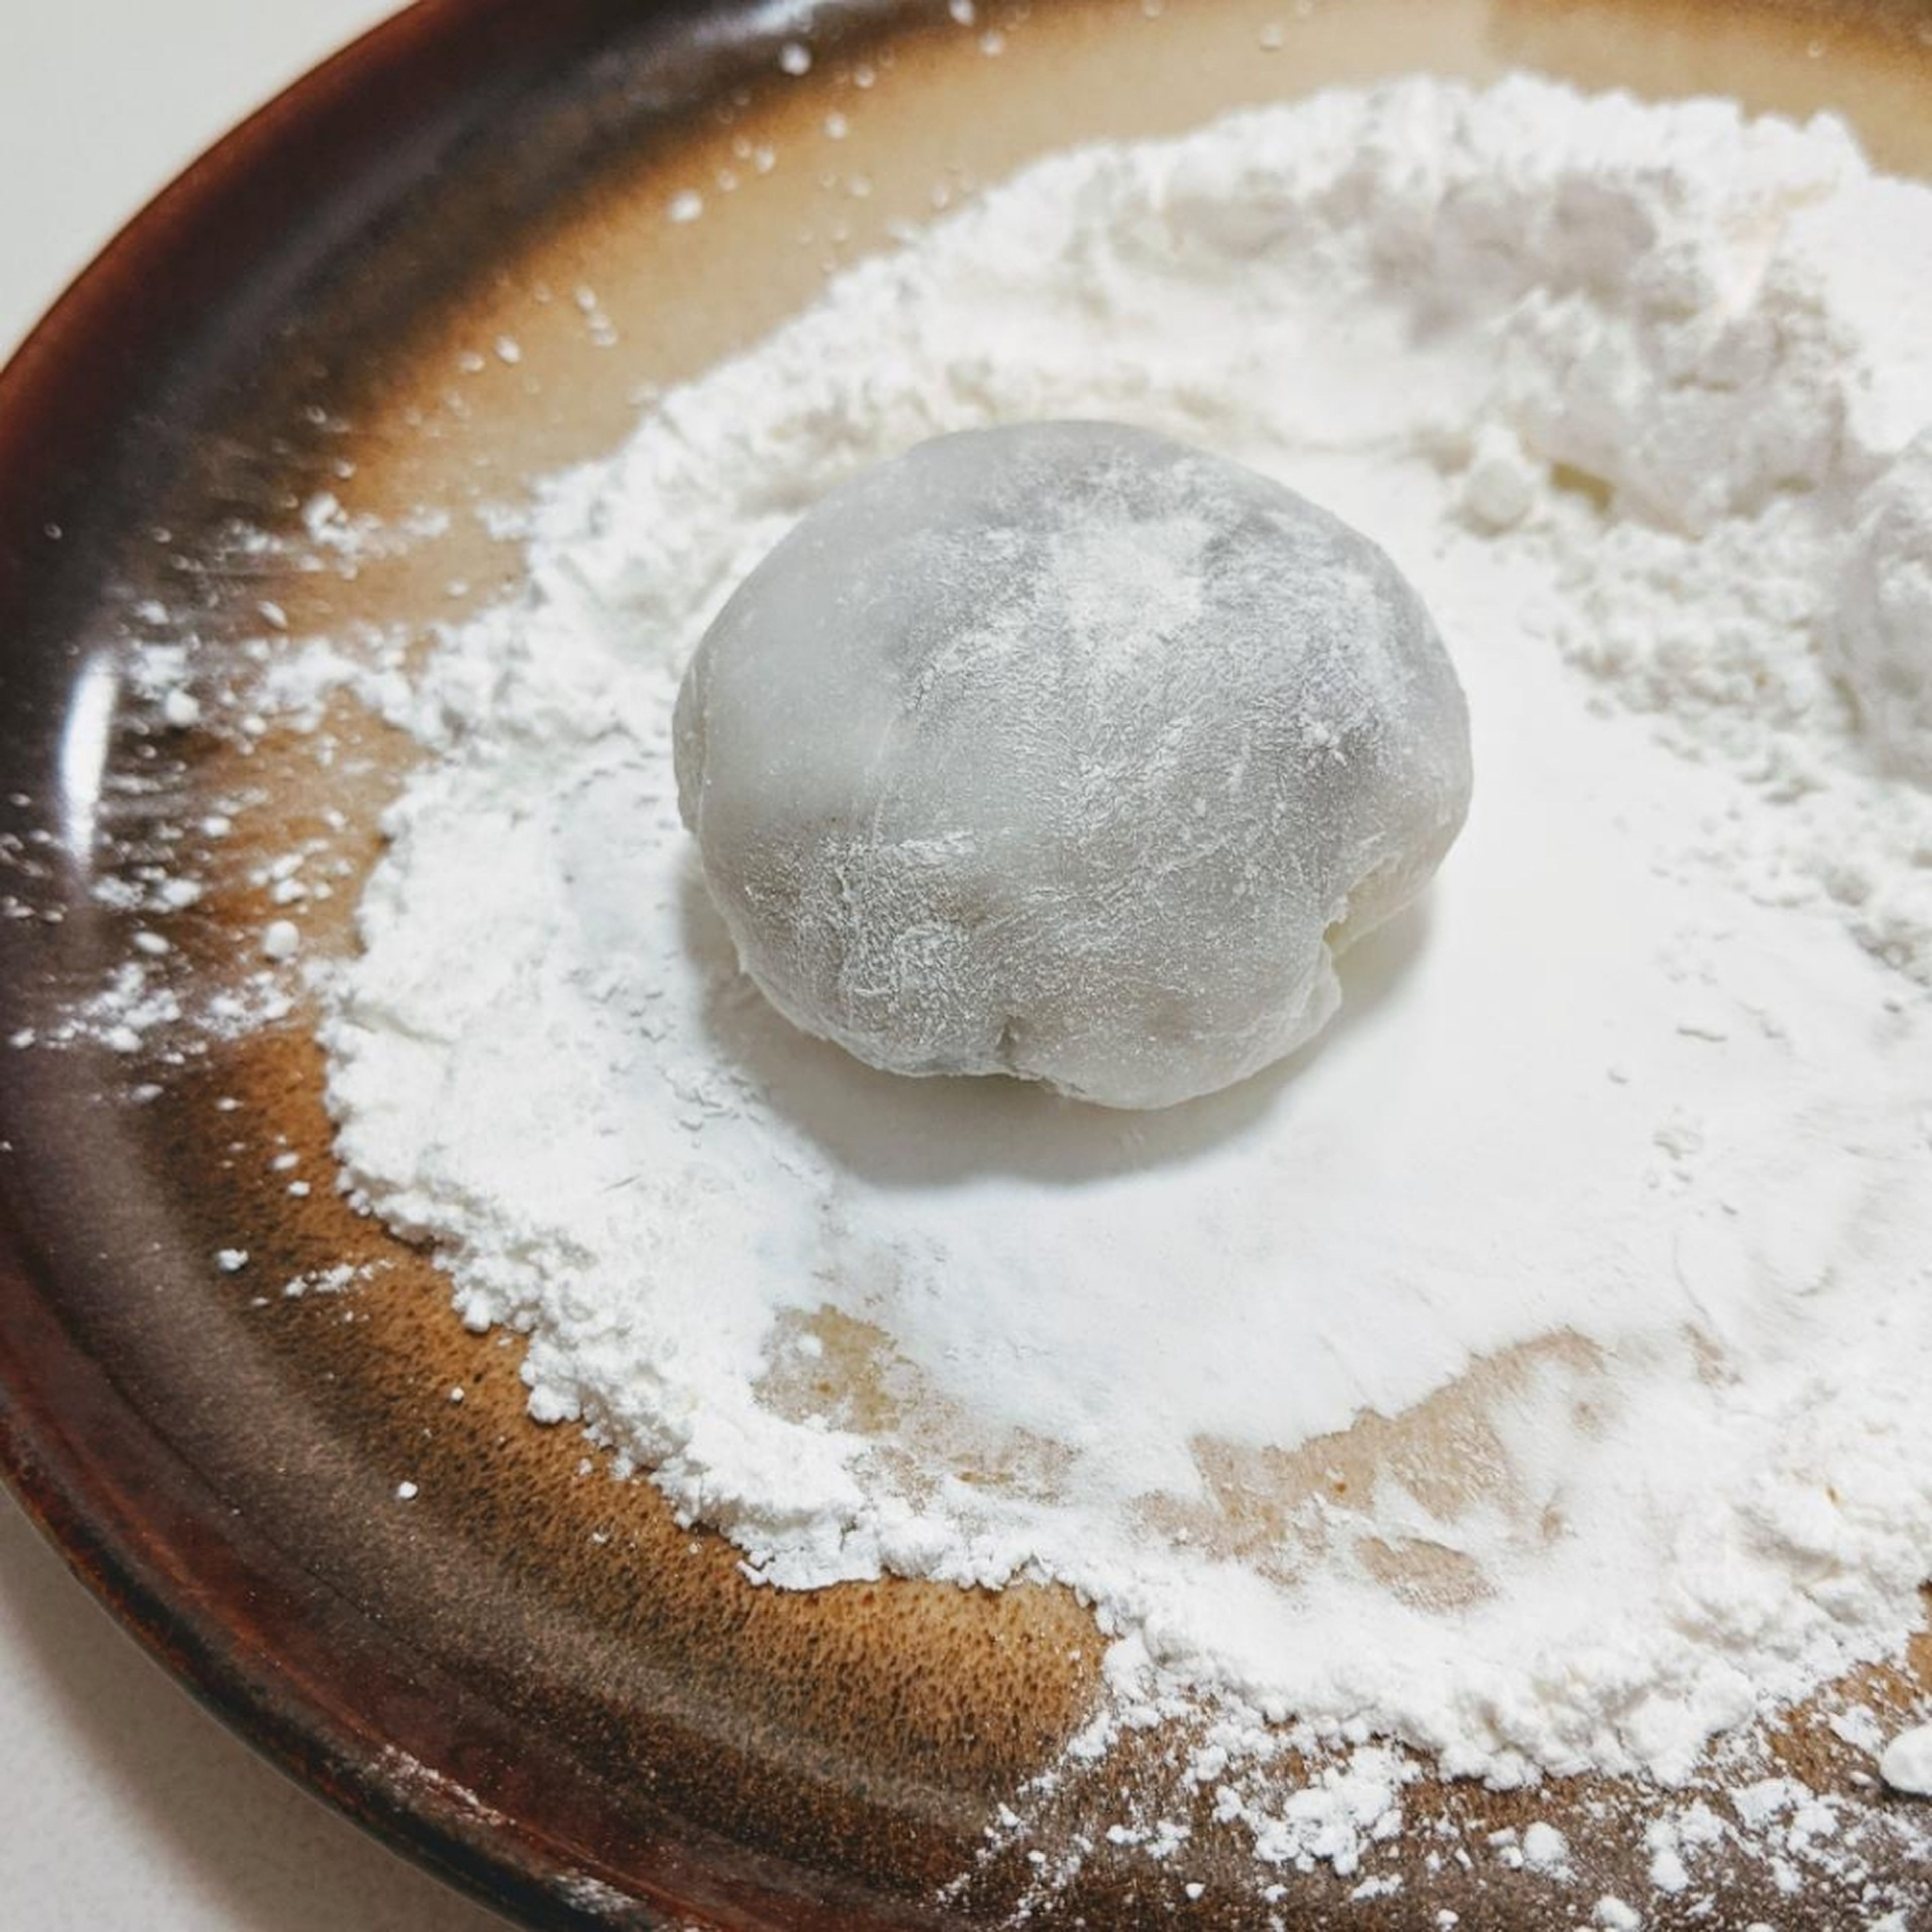 Make it round with both hands if necessary, here you go, the first mochi!